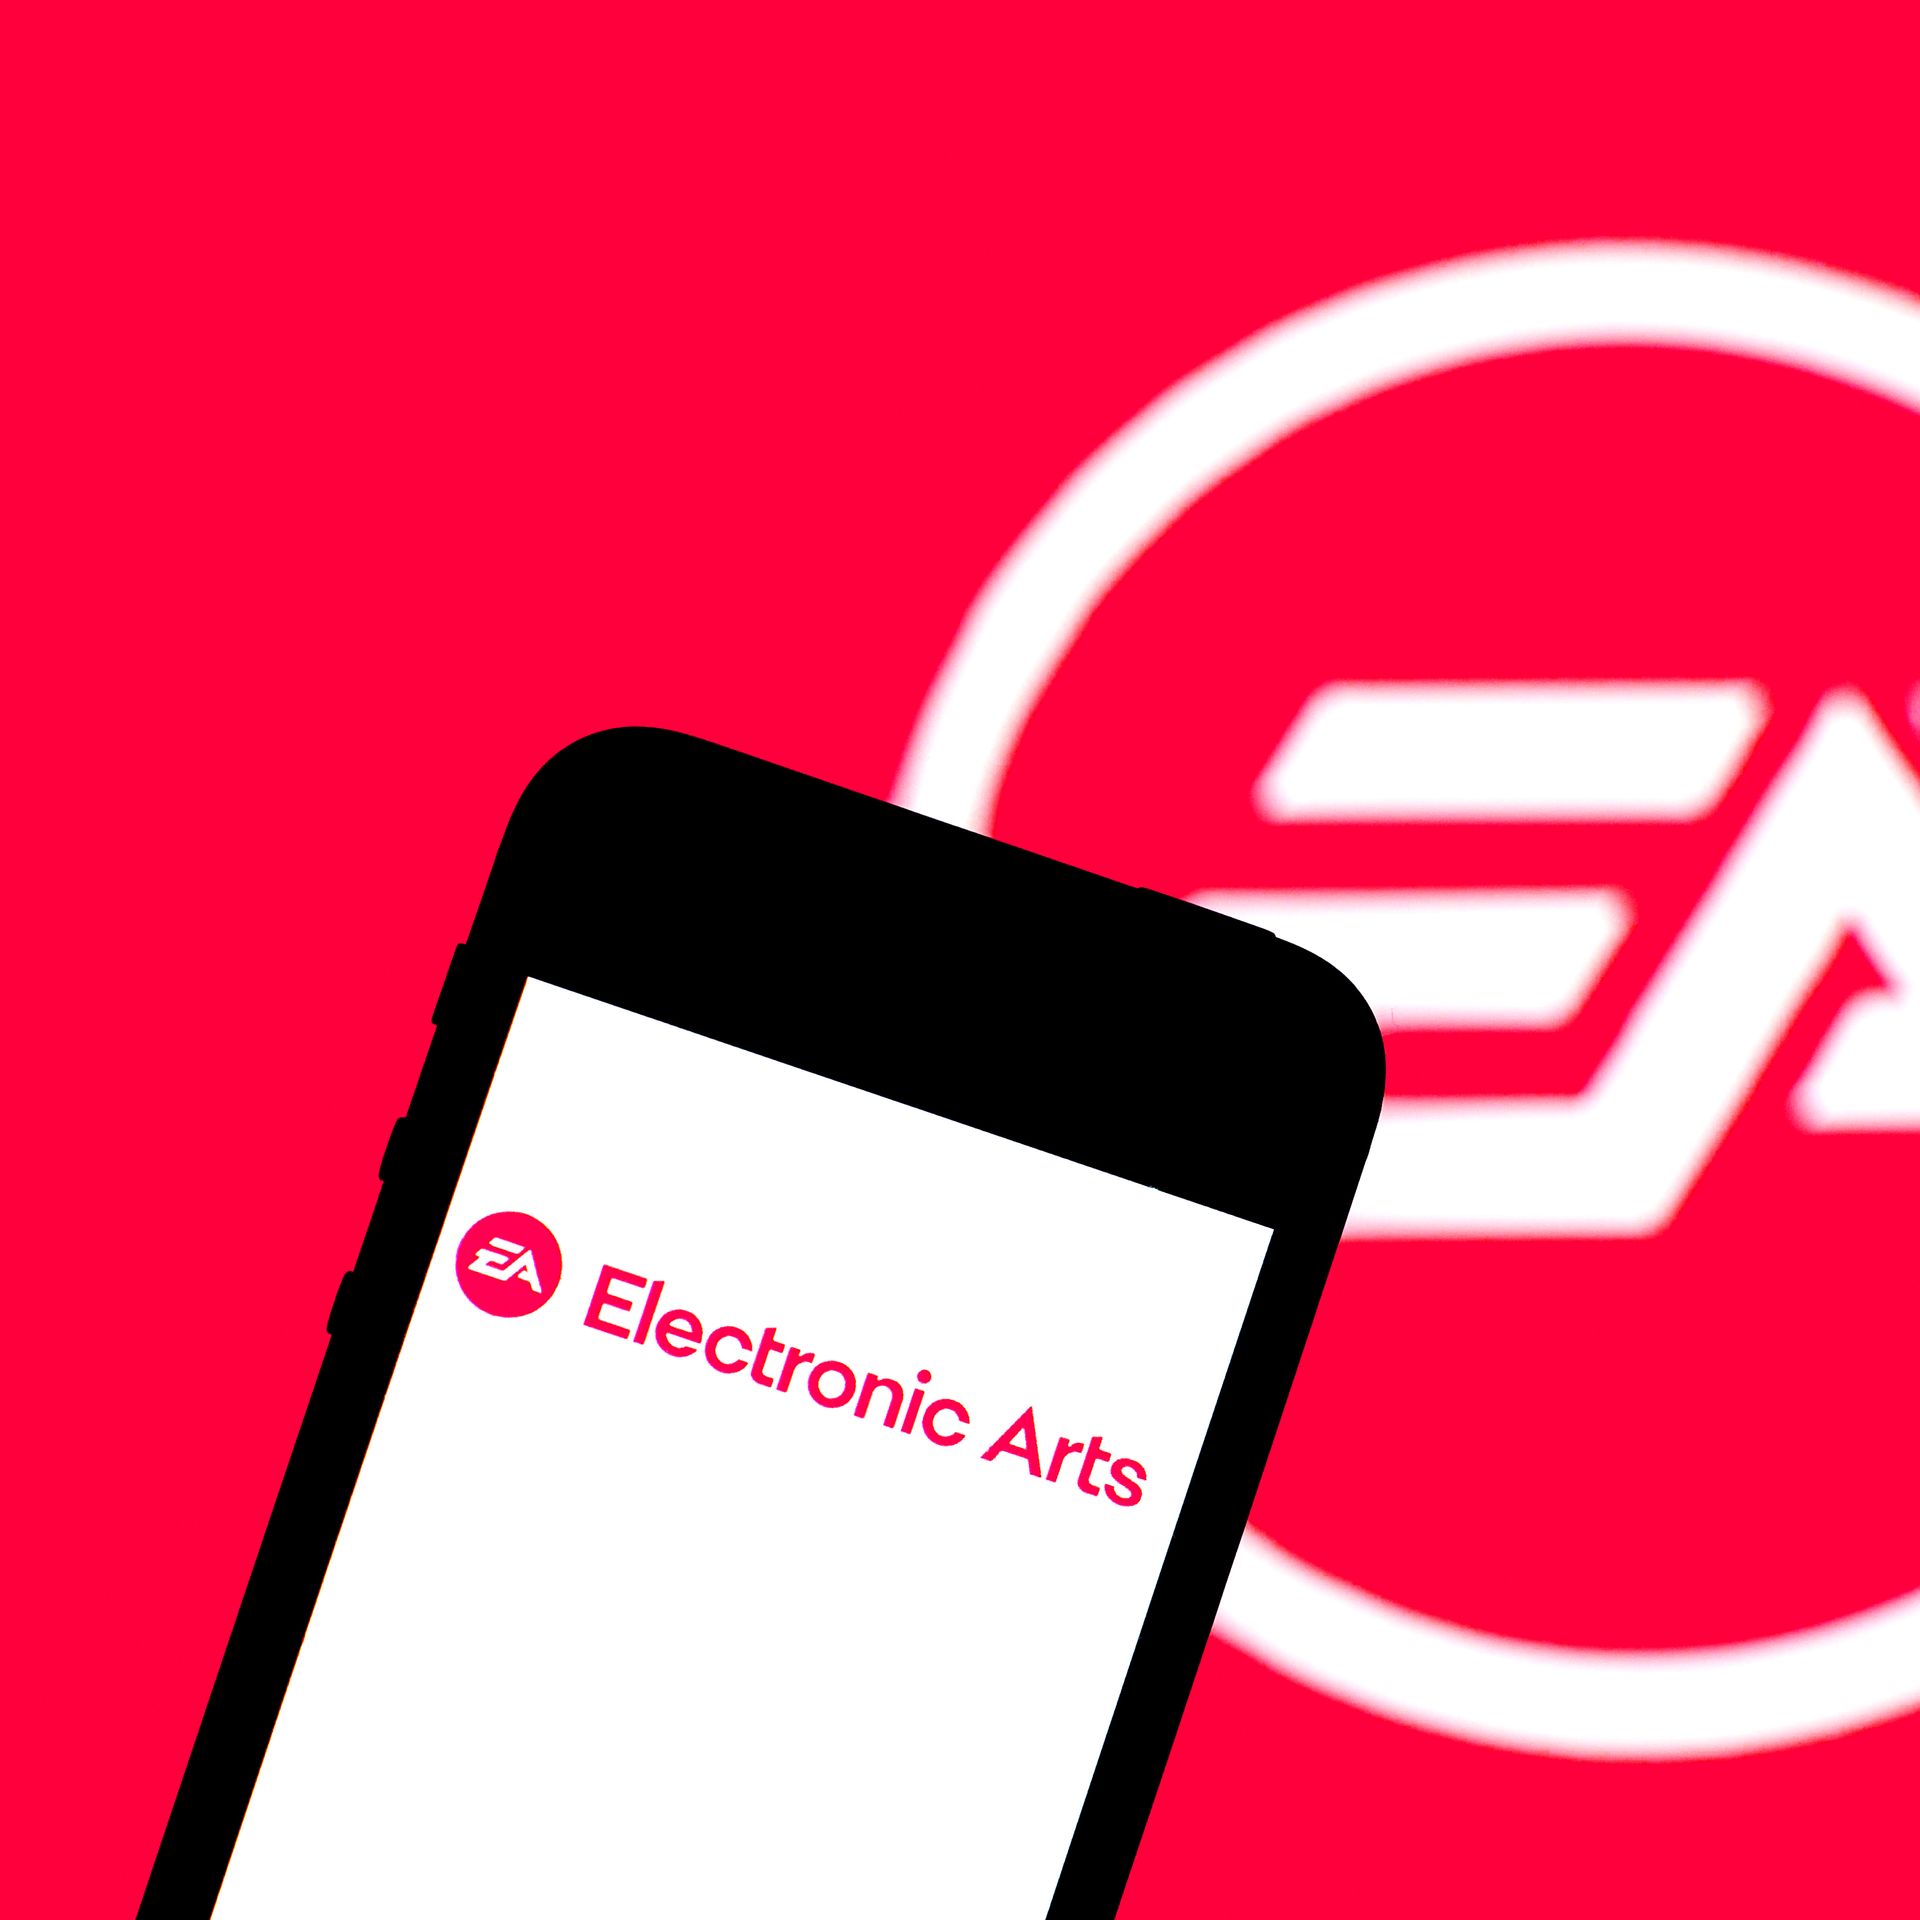 Photo illustration of a cell phone and the EA logo